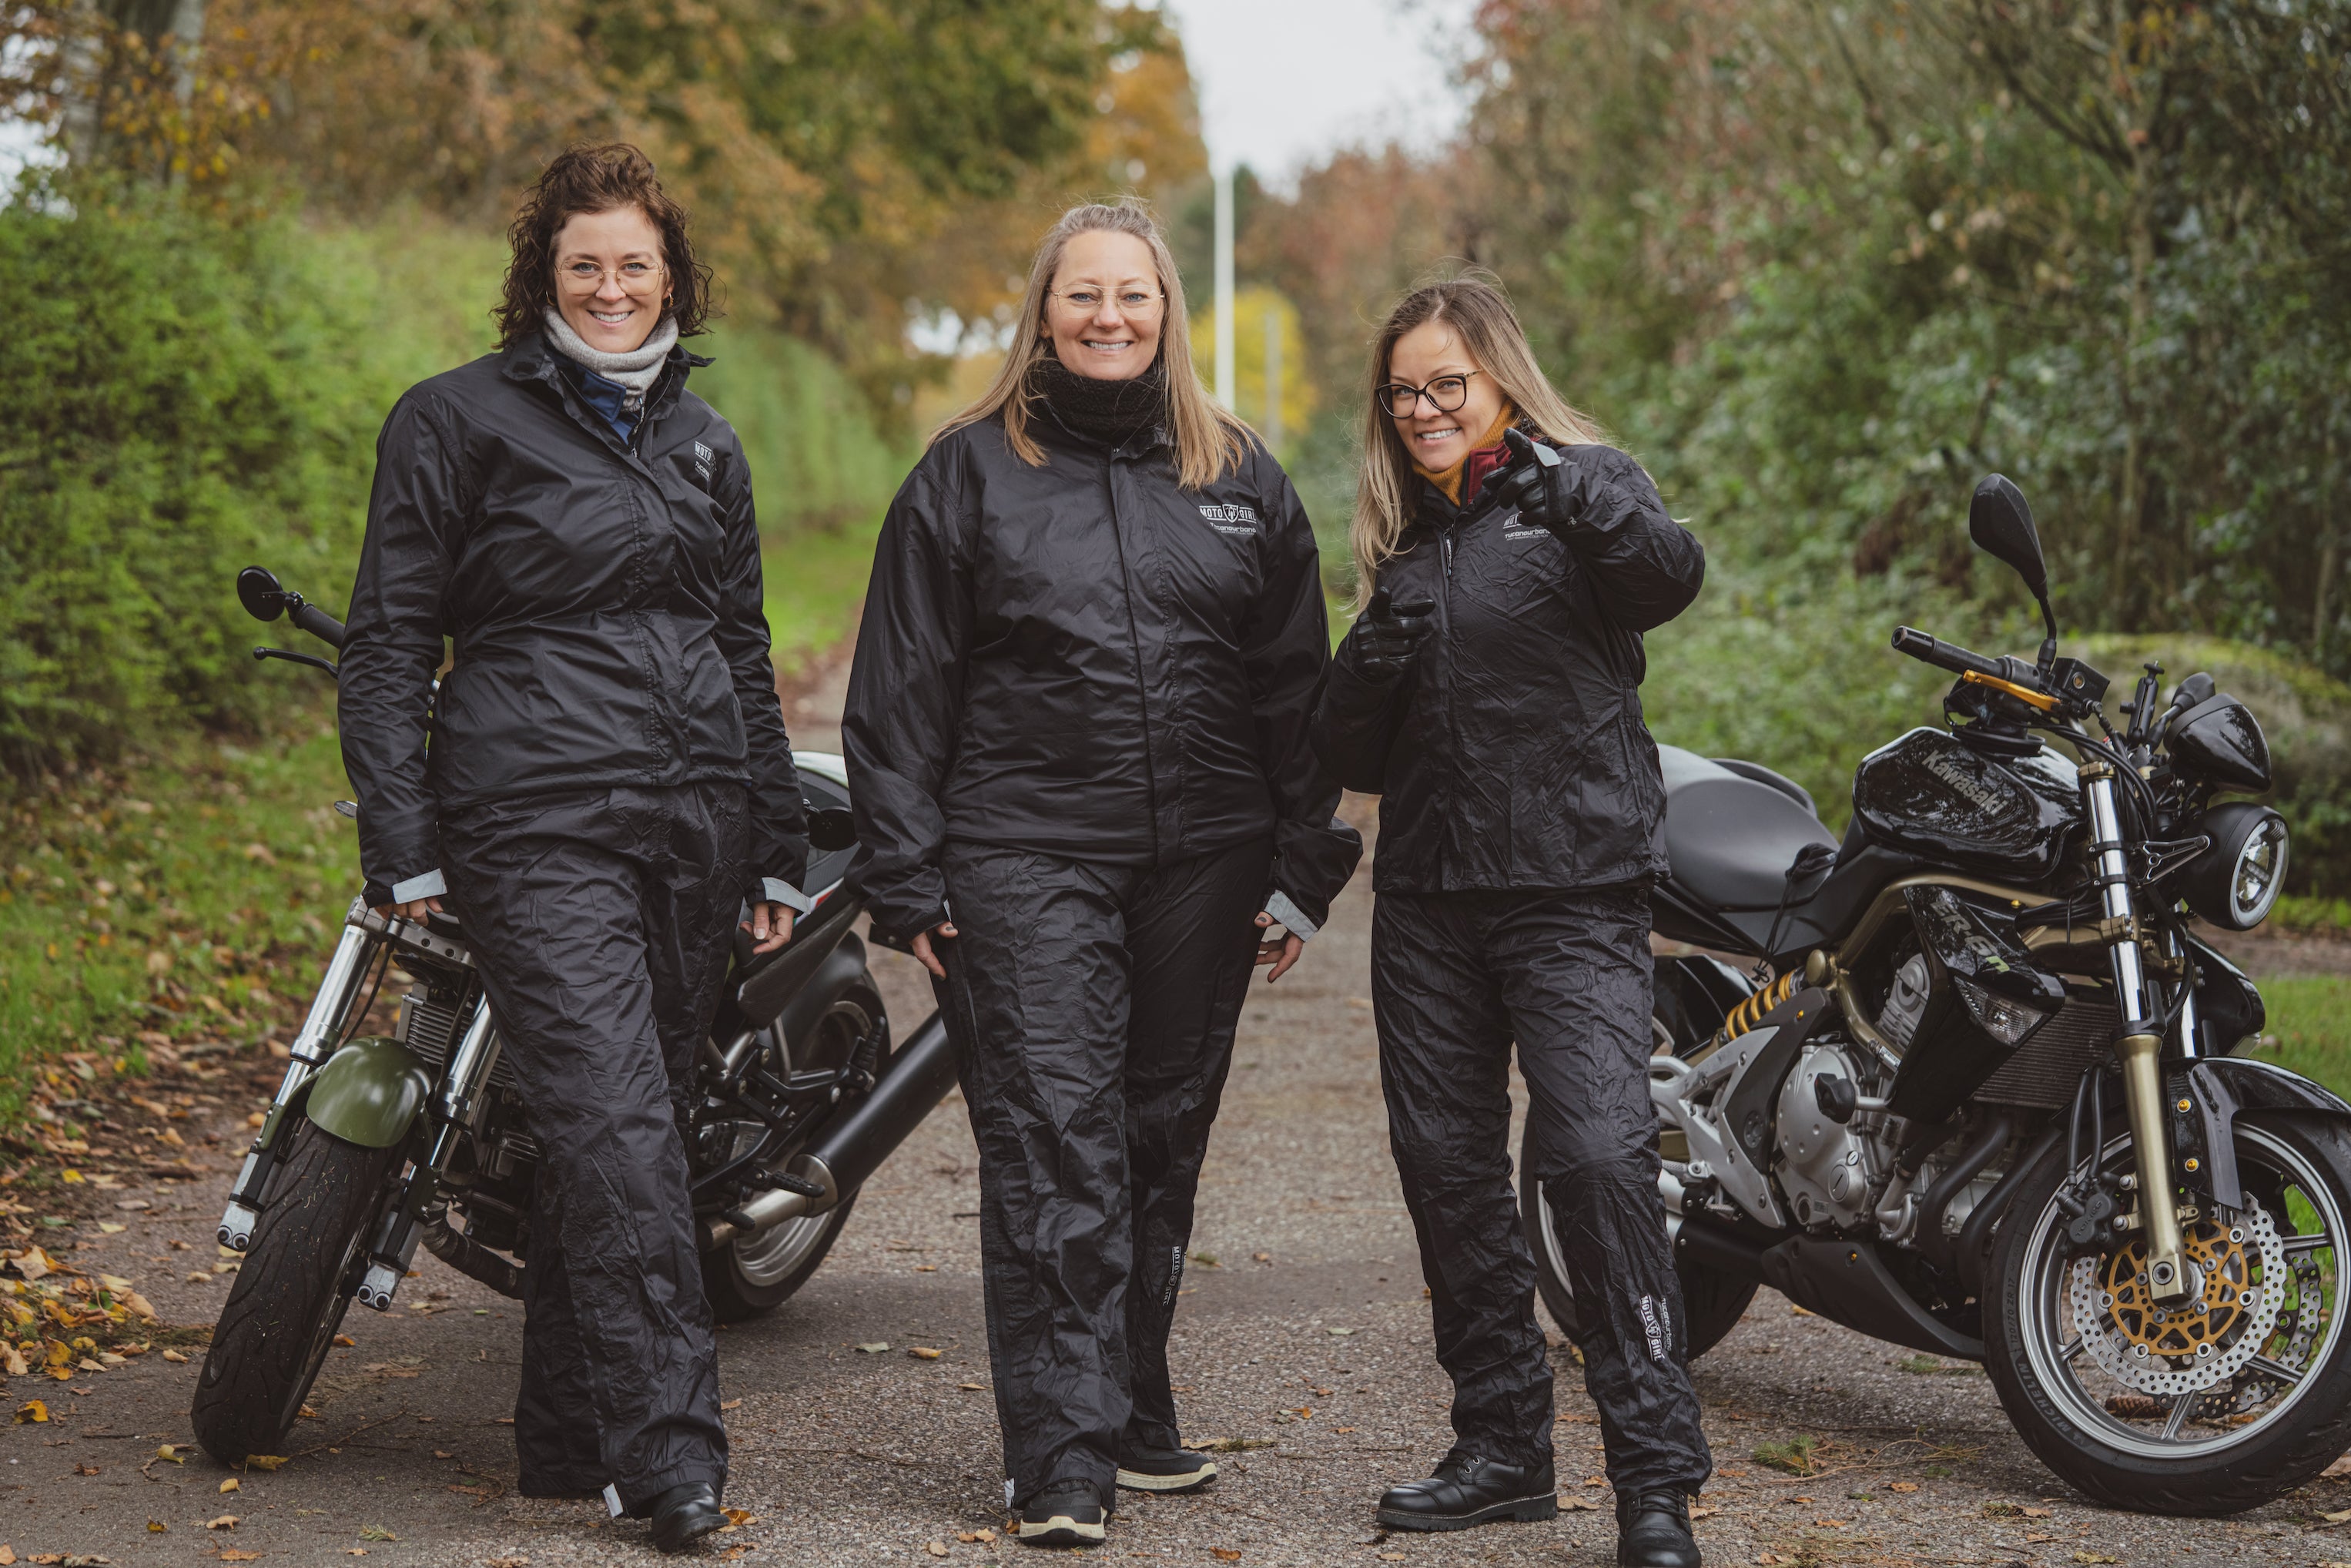 Three women with their motorcycles wearing black rain clothes